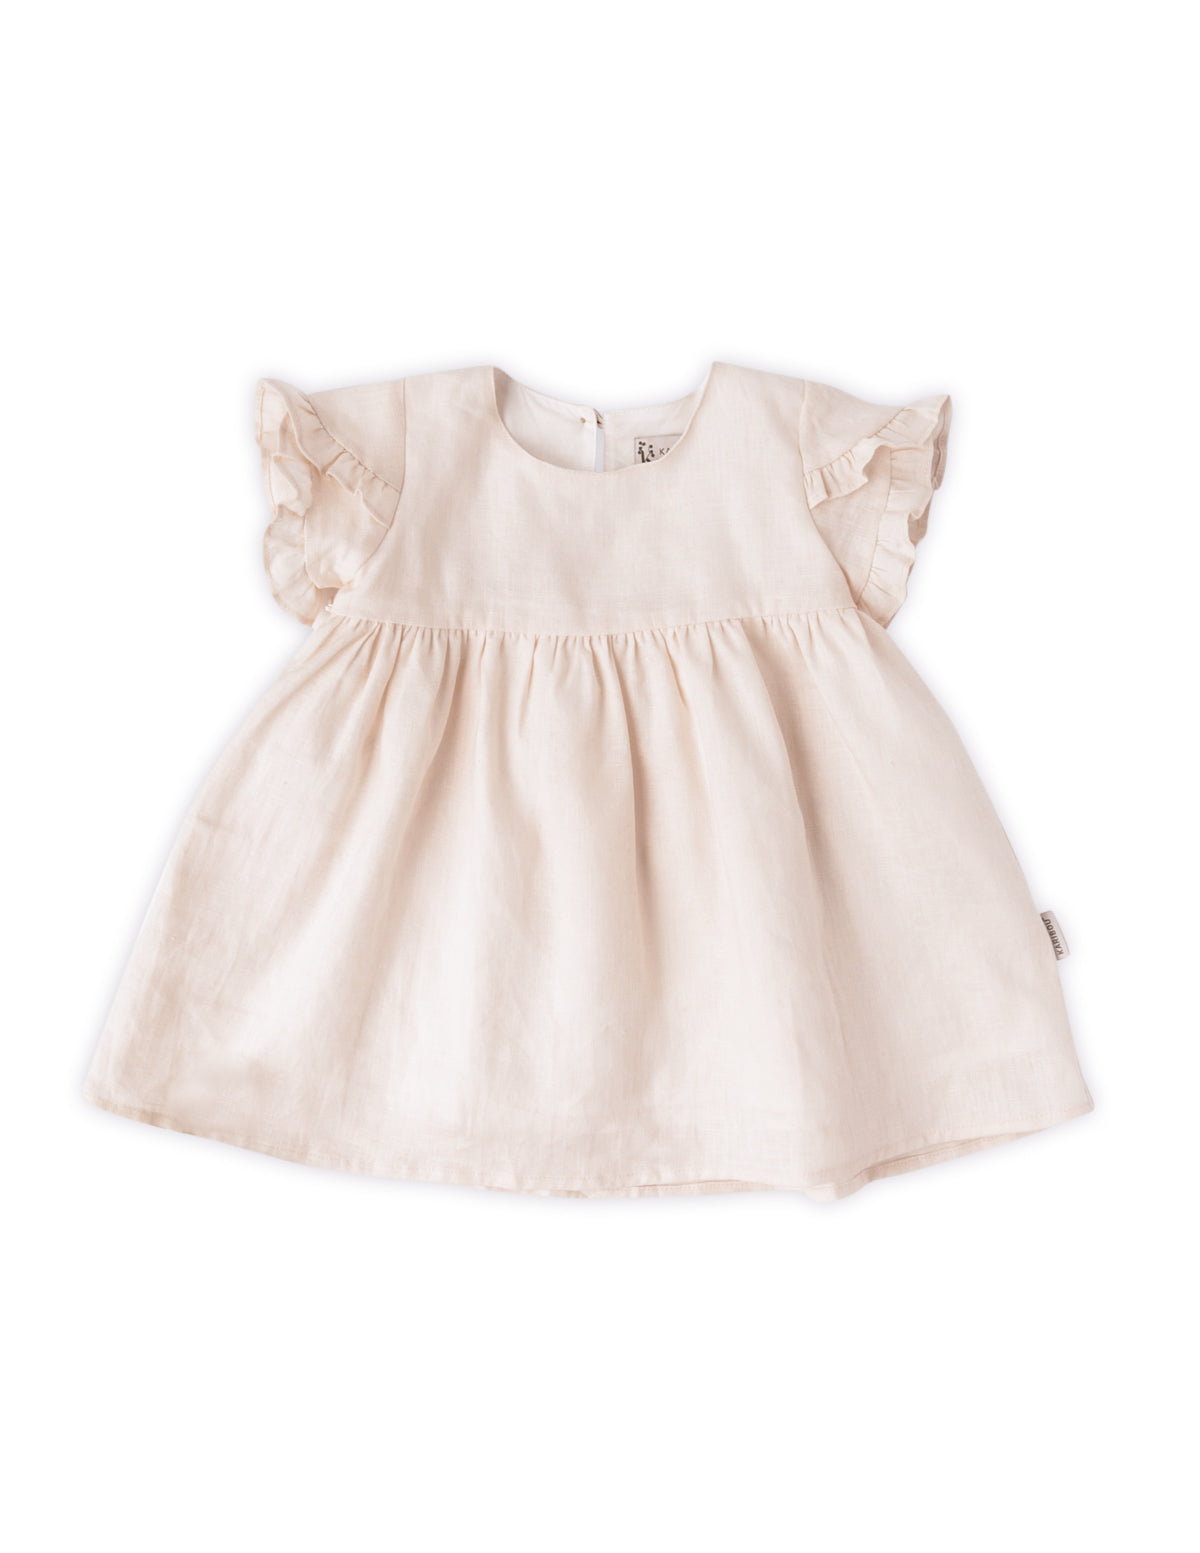 Newborn Baby Girl Dress Party Dresses for Girls 3 Year Birthday Princess  Dress Lace Christening Gown Baby Clothing White Baptism – the best products  in the Joom Geek online store